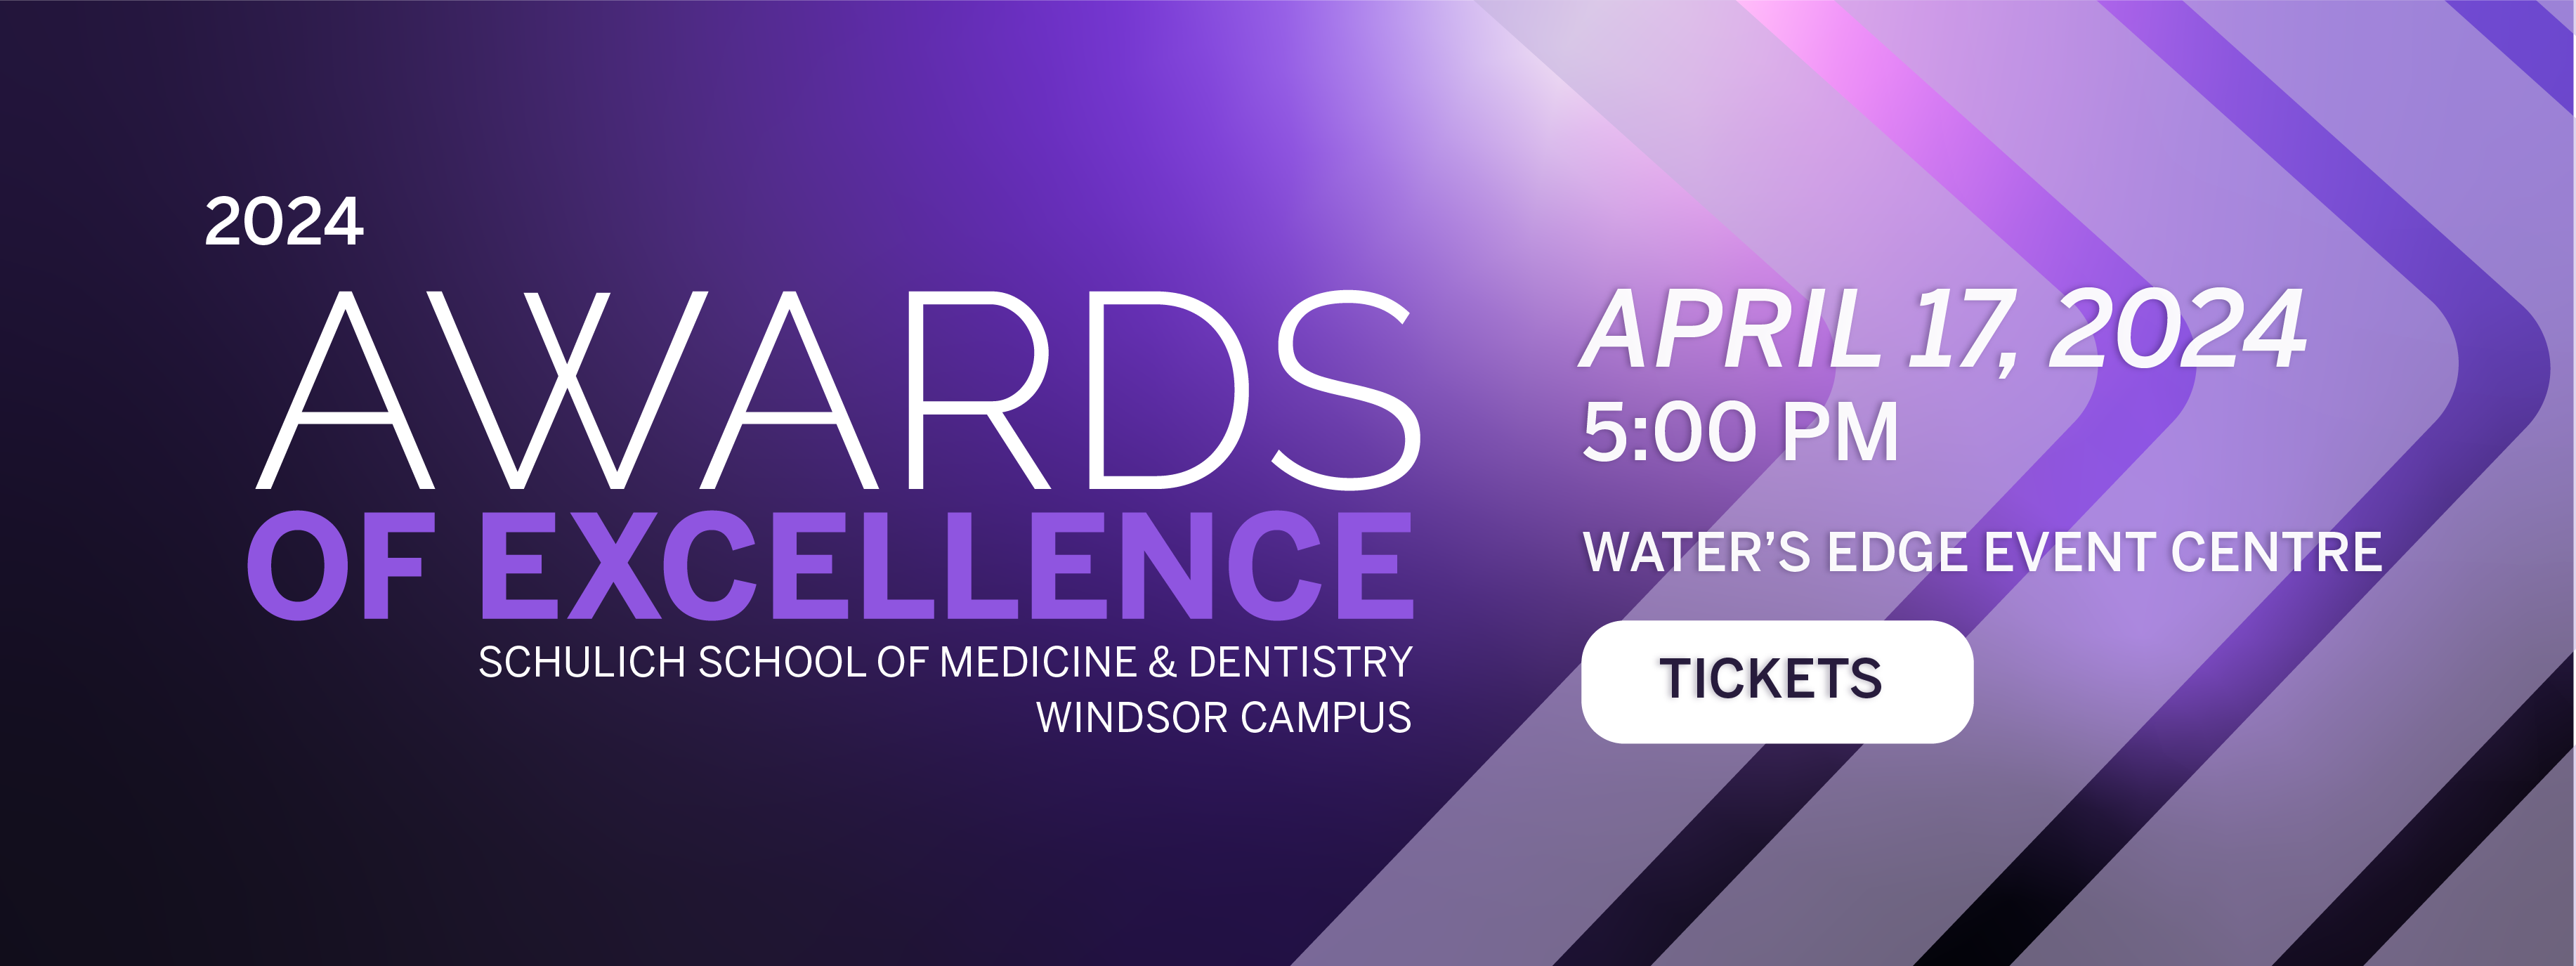 Schulich Awards of Excellence, Tickets fr Windsor Campus